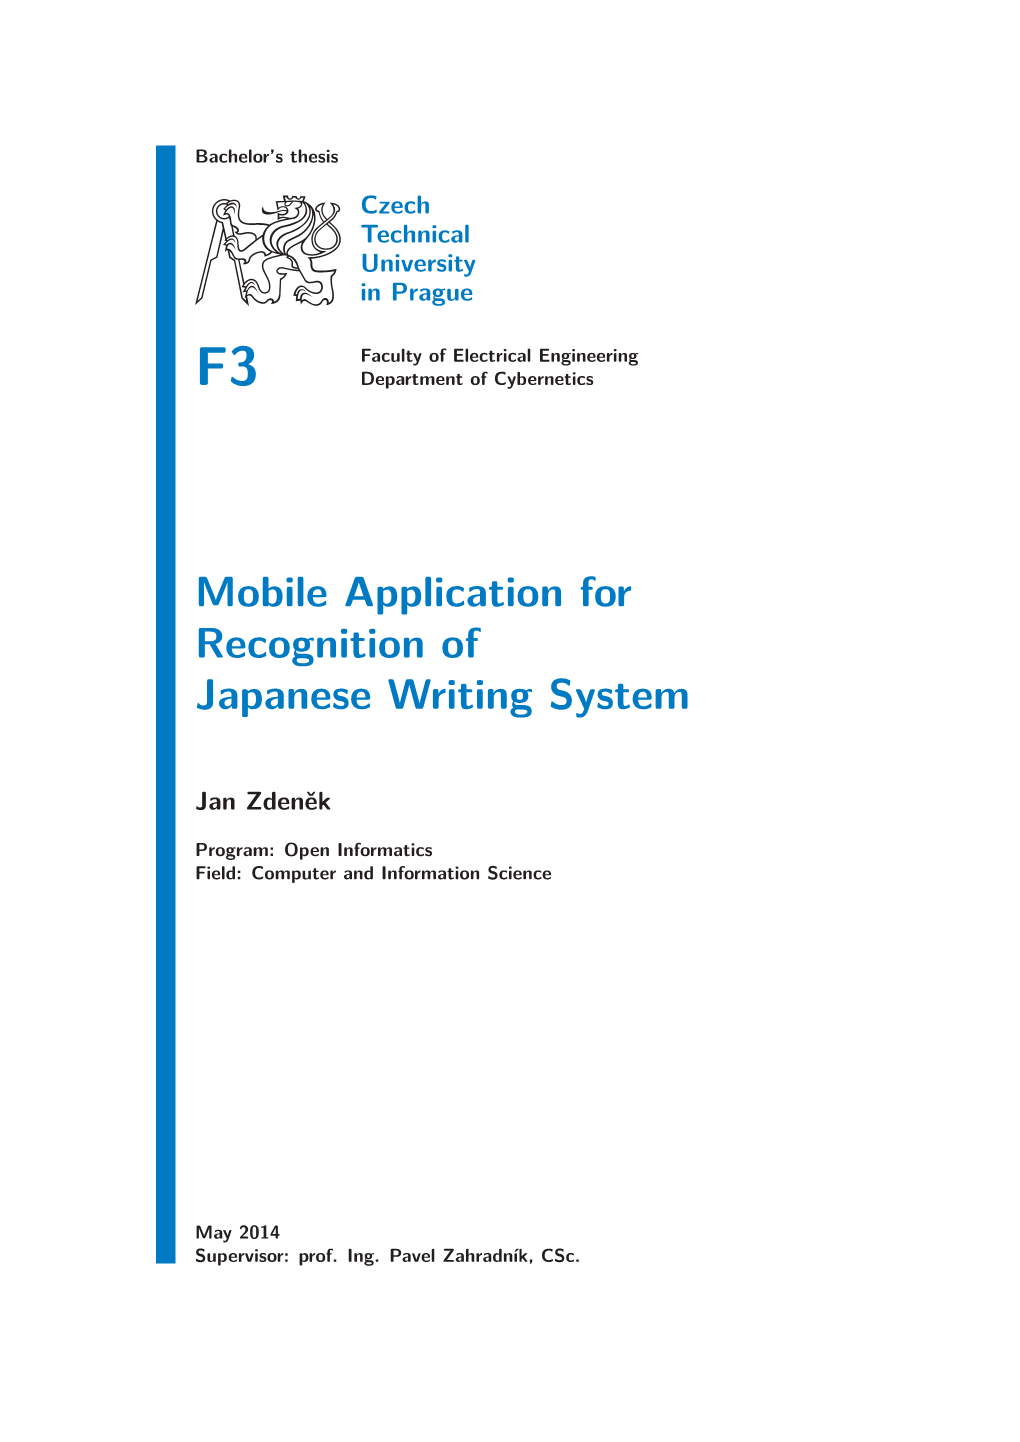 Mobile Application for Recognition of Japanese Writing System